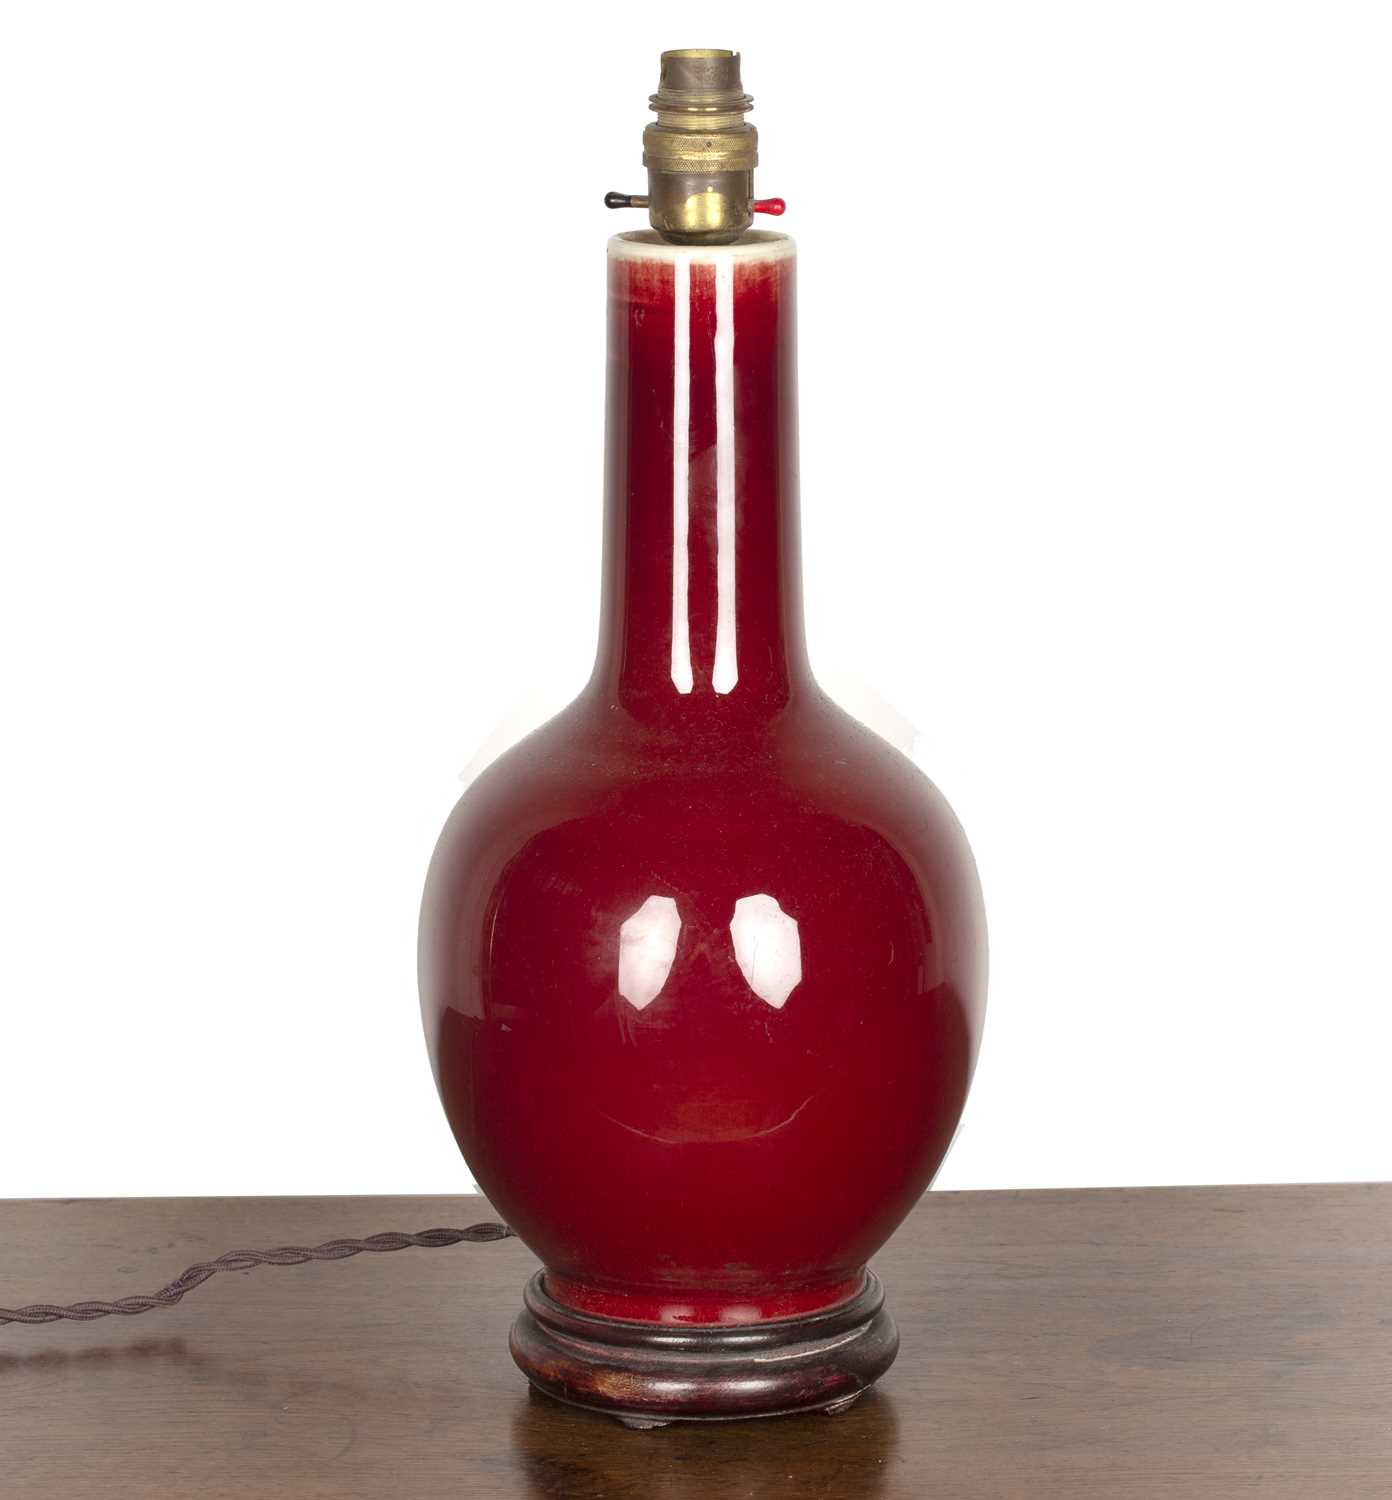 Sang de boeuf bottle vase Chinese, 18th/19th Century converted to a table lamp, and with a